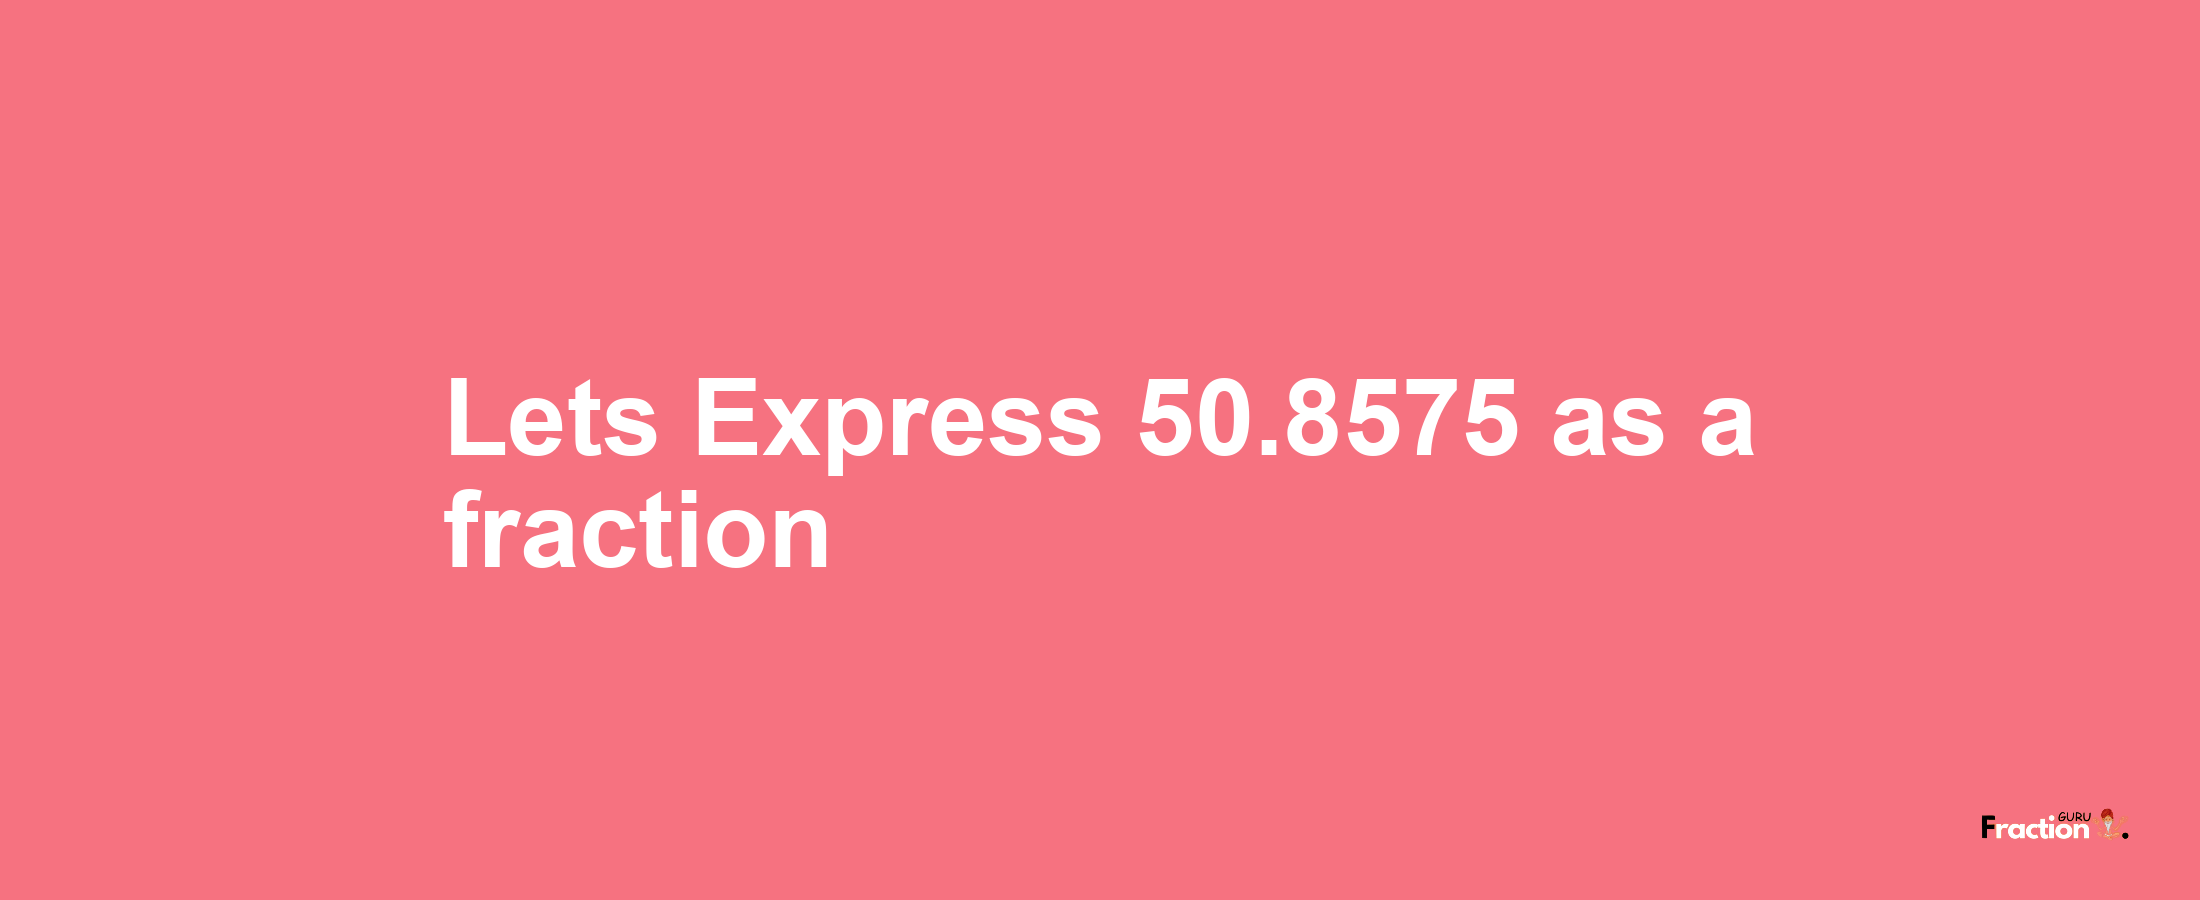 Lets Express 50.8575 as afraction